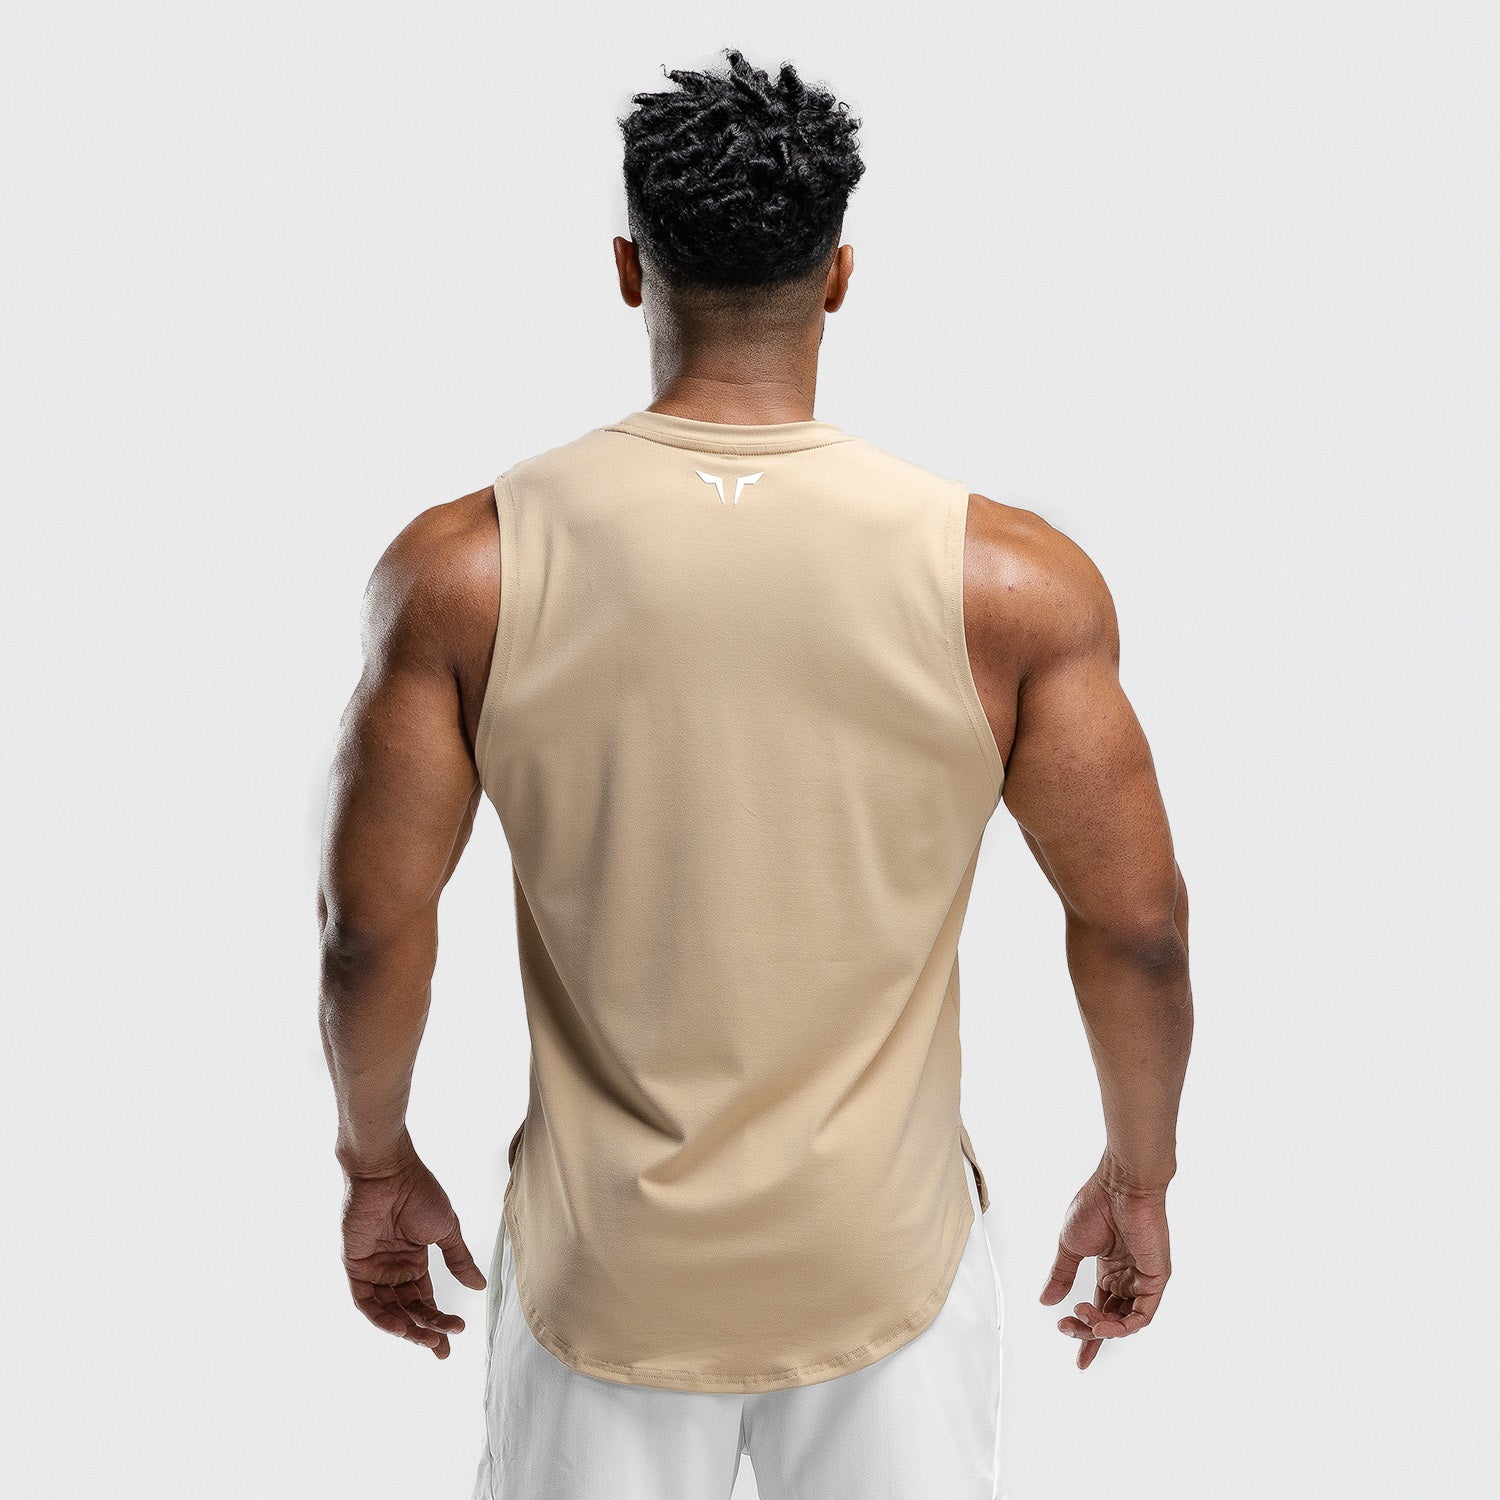 squatwolf-workout-tank-tops-for-men-tank-beige-white-gym-hype